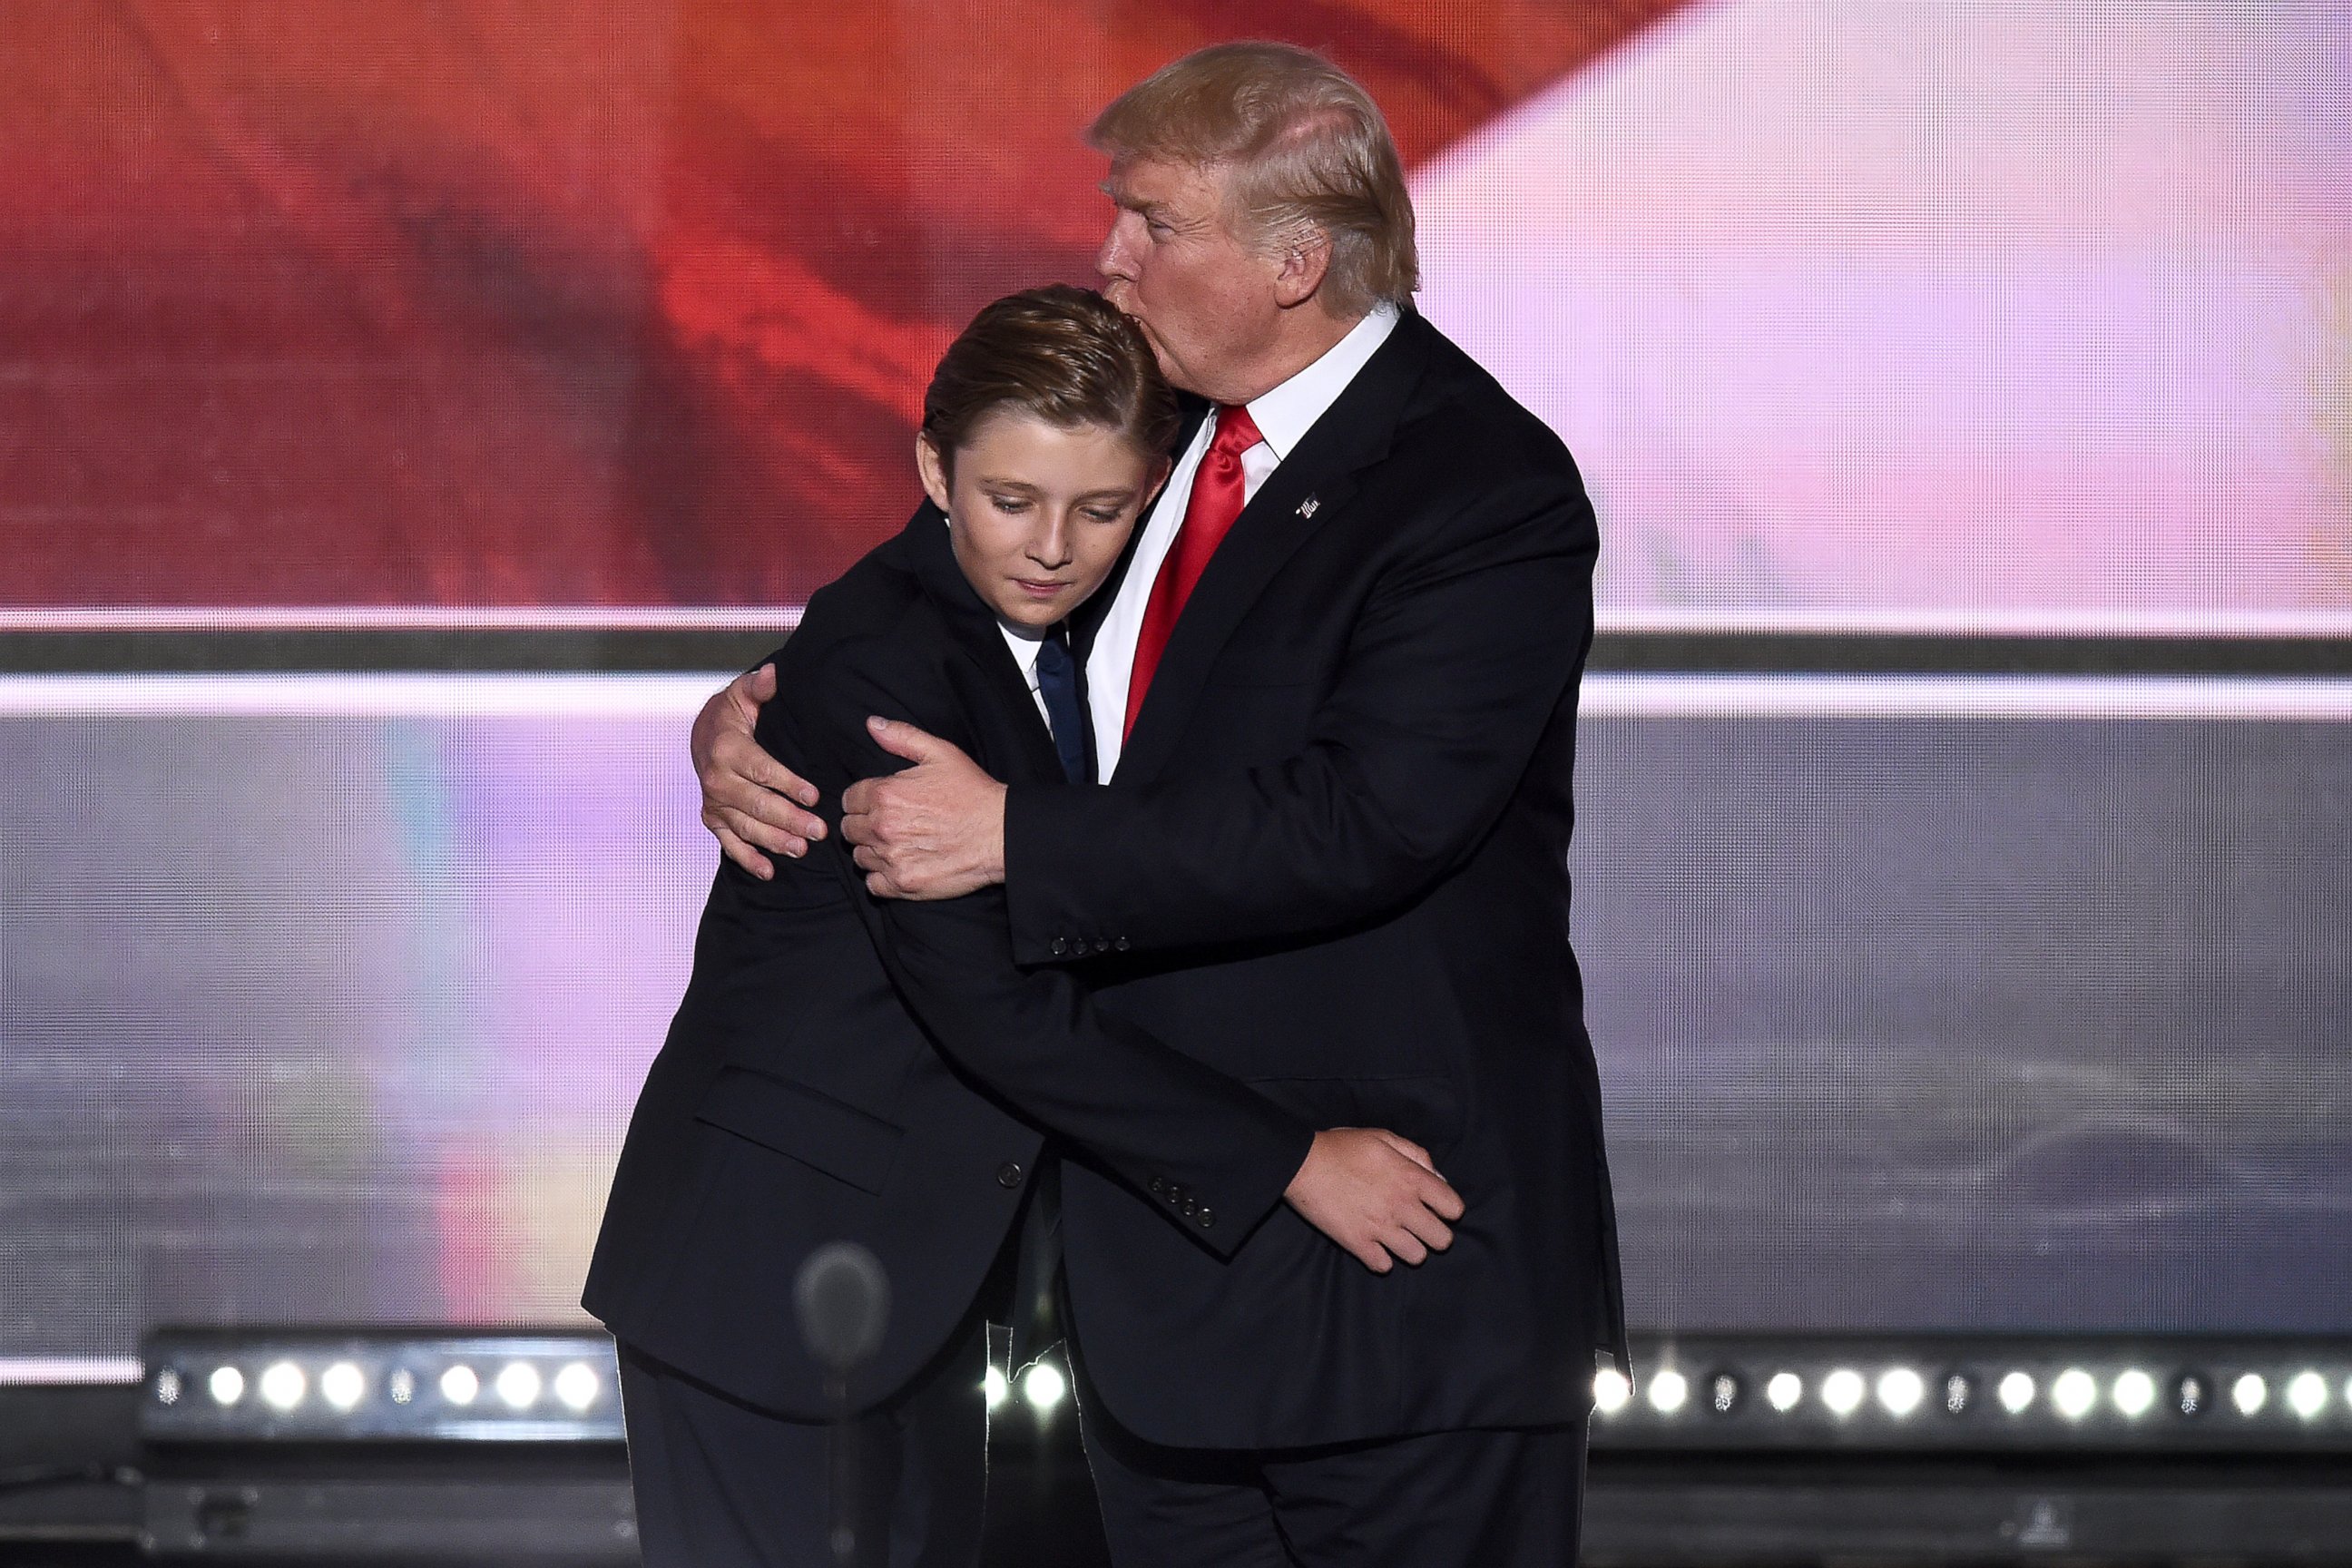 PHOTO: Republican presidential candidate Donald Trump kisses his son Barron Trump during celebrations after Trump's acceptance speech on the final day of the Republican National Convention at the Quicken Loans Arena in Cleveland, on July 21, 2016. 